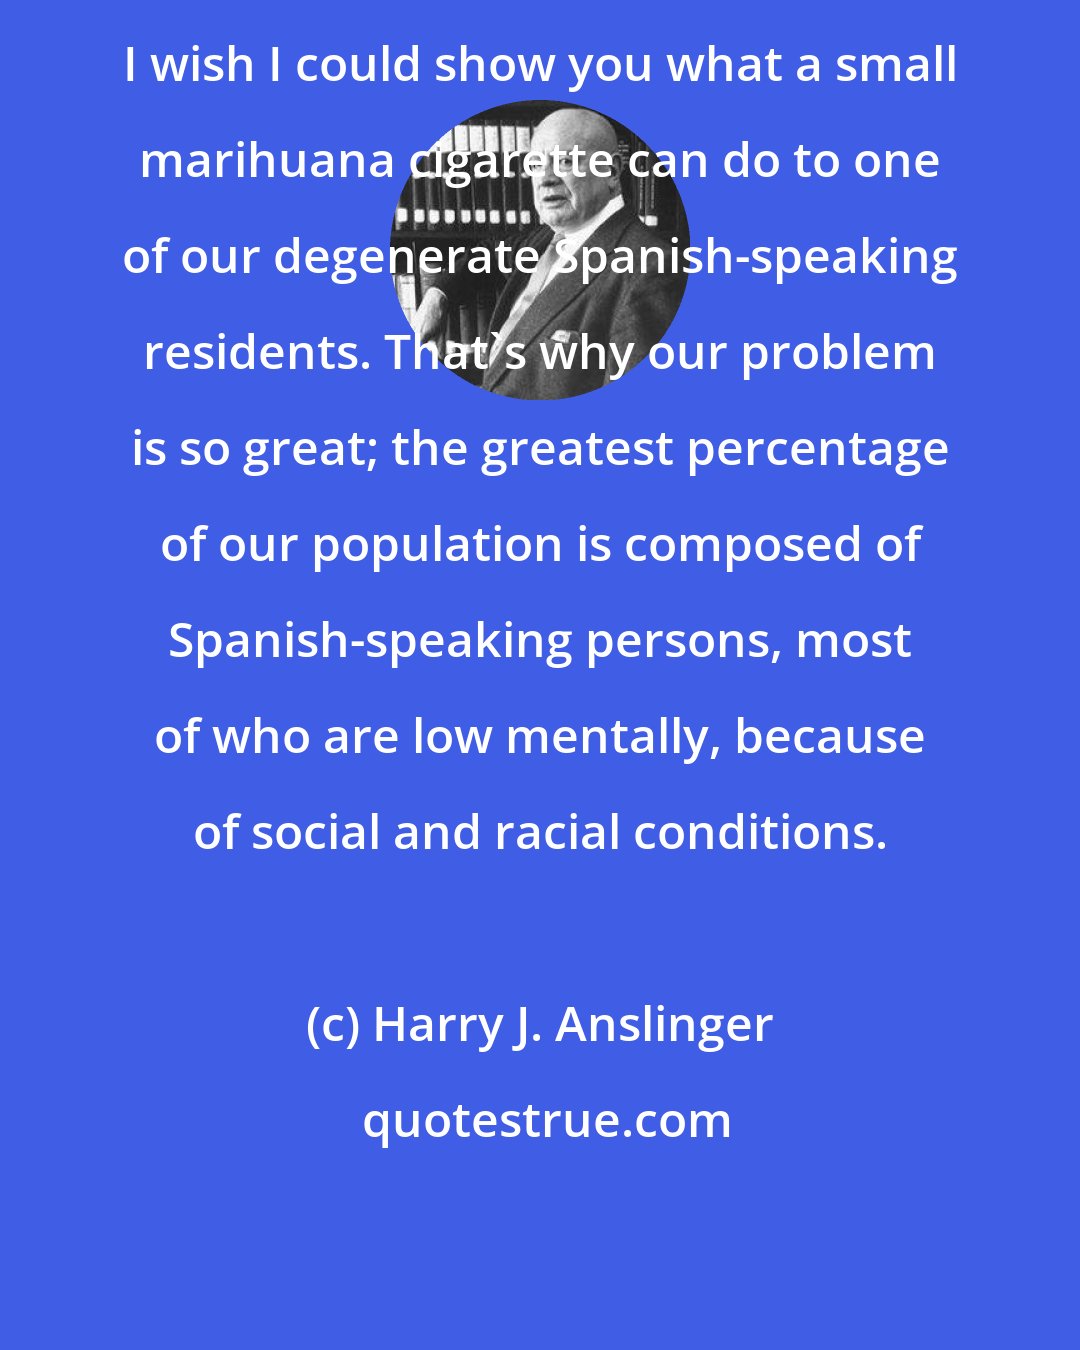 Harry J. Anslinger: I wish I could show you what a small marihuana cigarette can do to one of our degenerate Spanish-speaking residents. That's why our problem is so great; the greatest percentage of our population is composed of Spanish-speaking persons, most of who are low mentally, because of social and racial conditions.